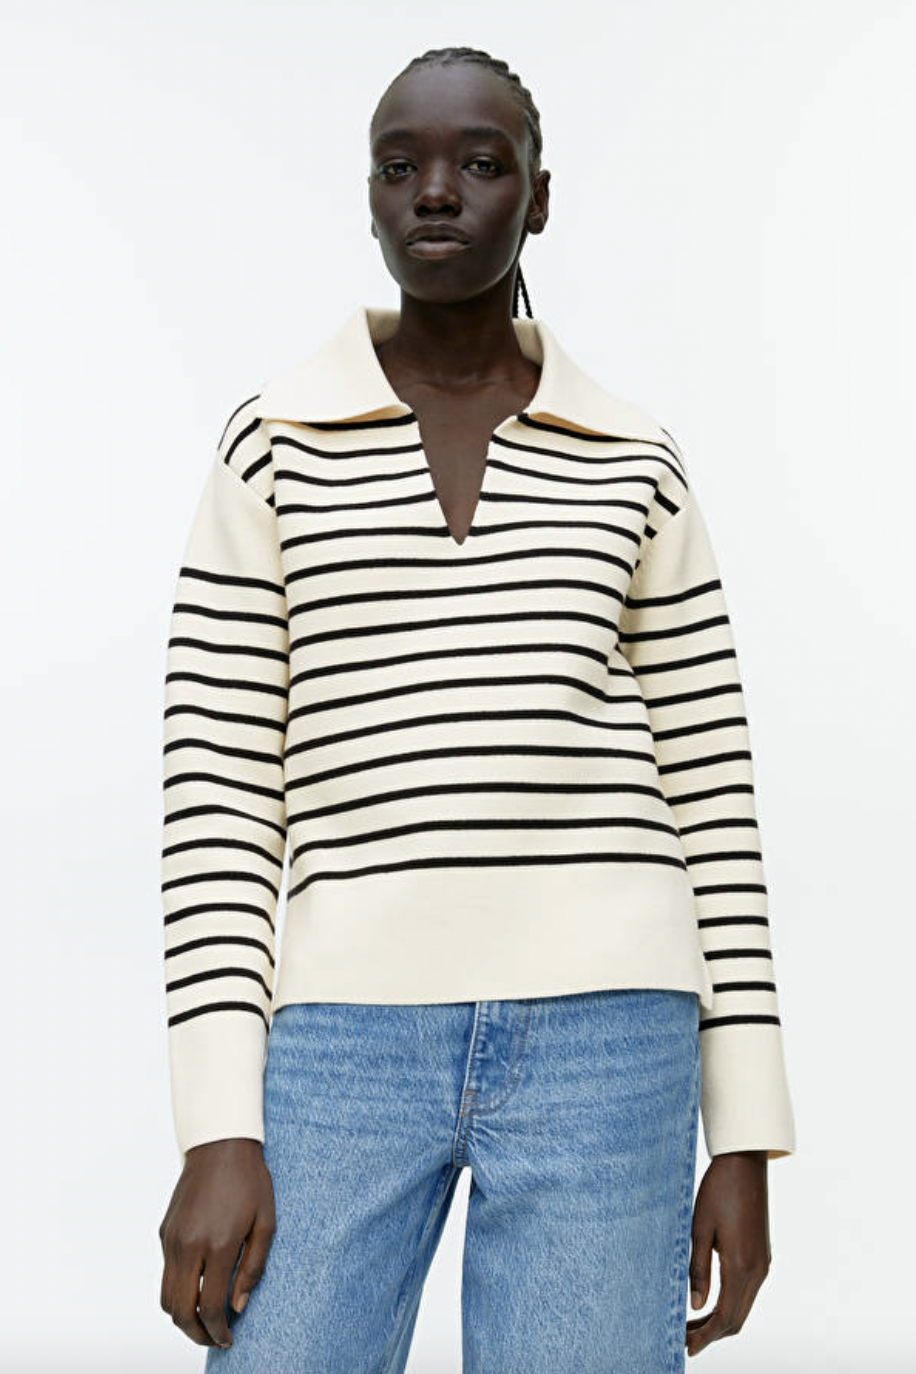 18 Stylish Striped Shirts For Women For Every Budget